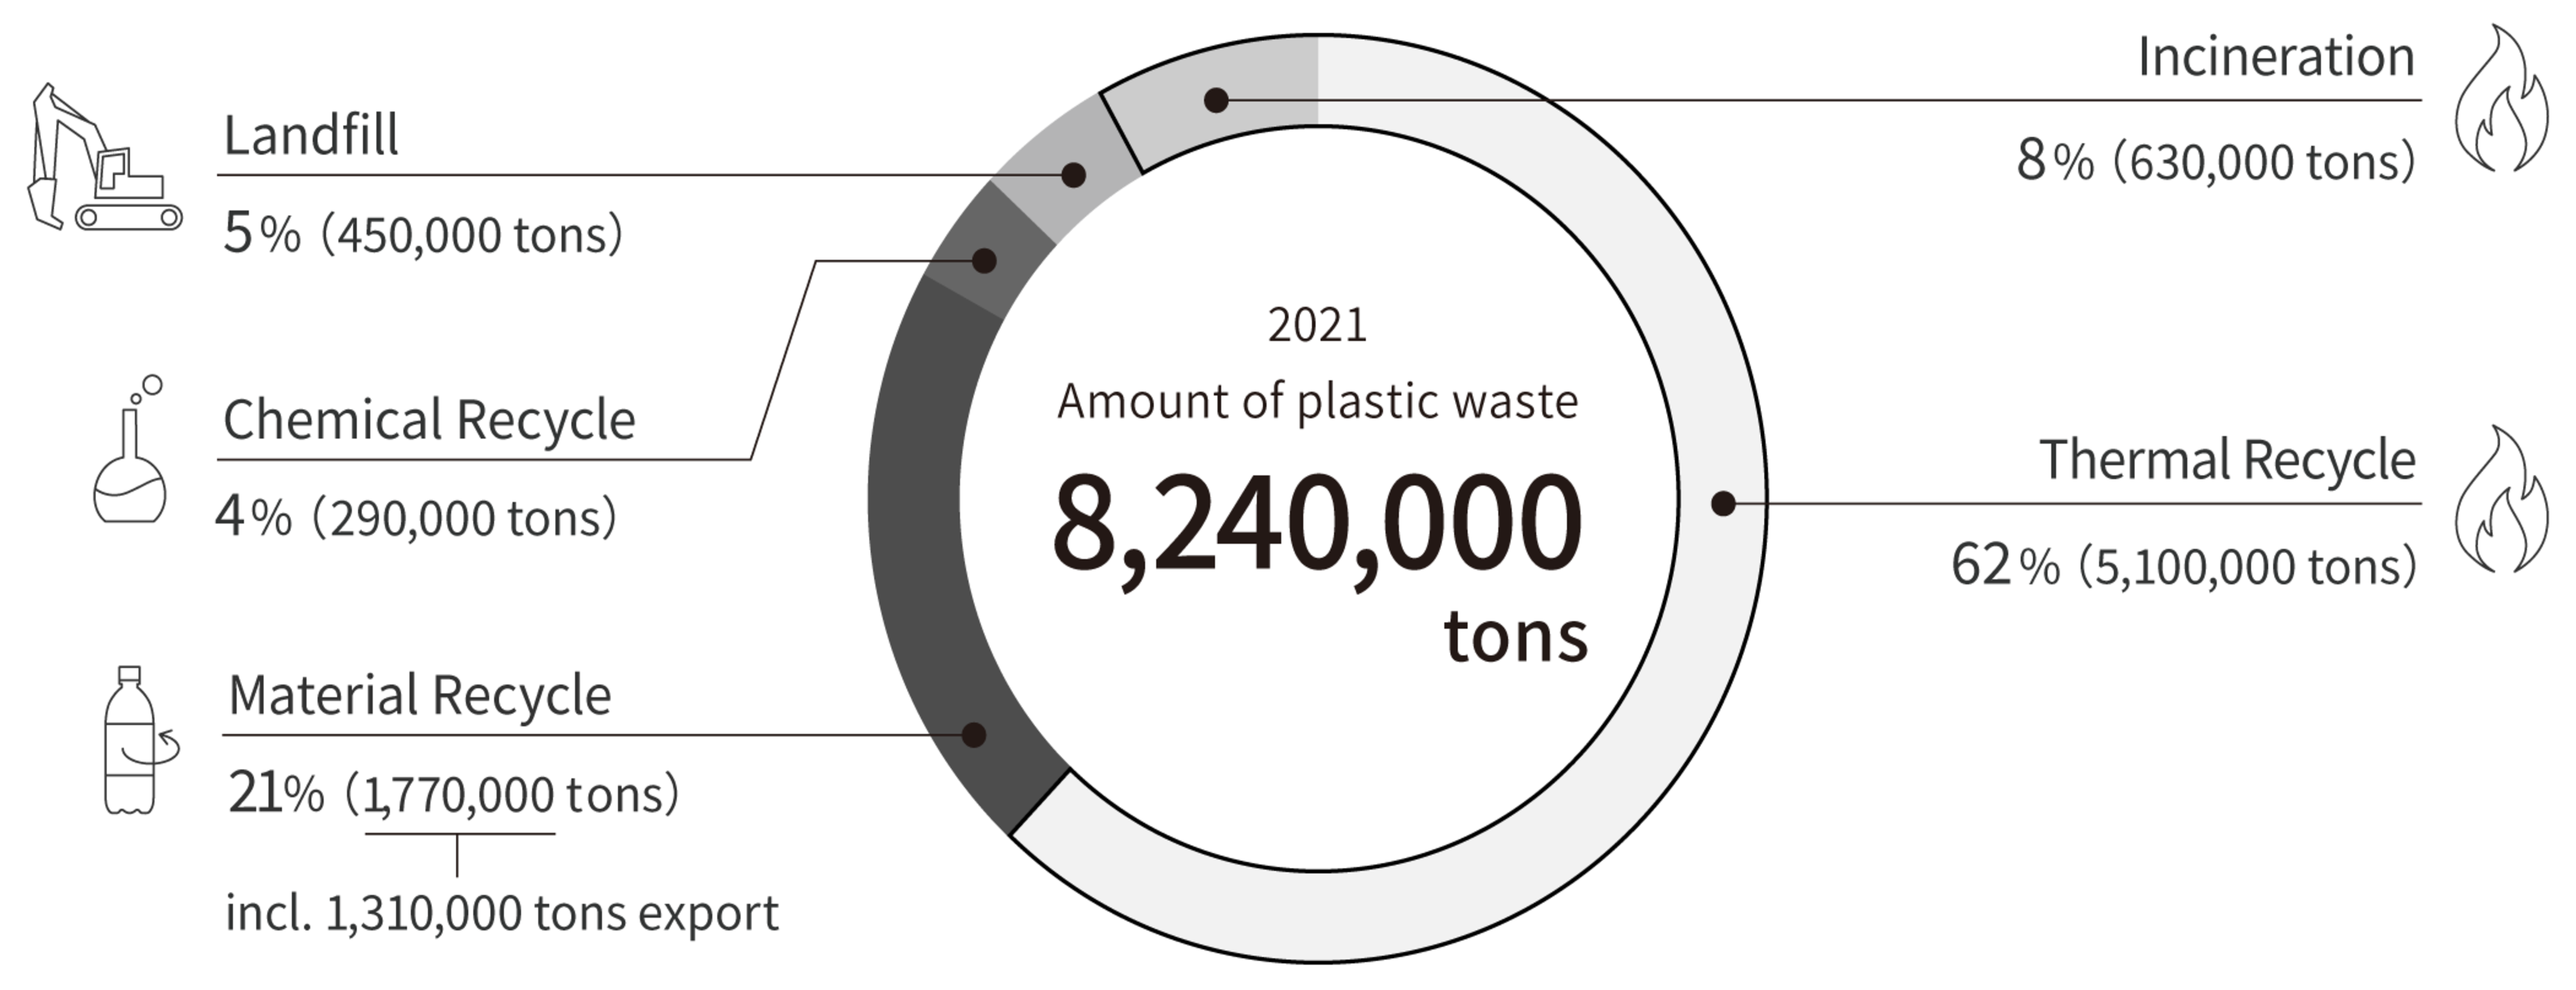 Detailed image of total waste plastic emissions of 8.22 million tons